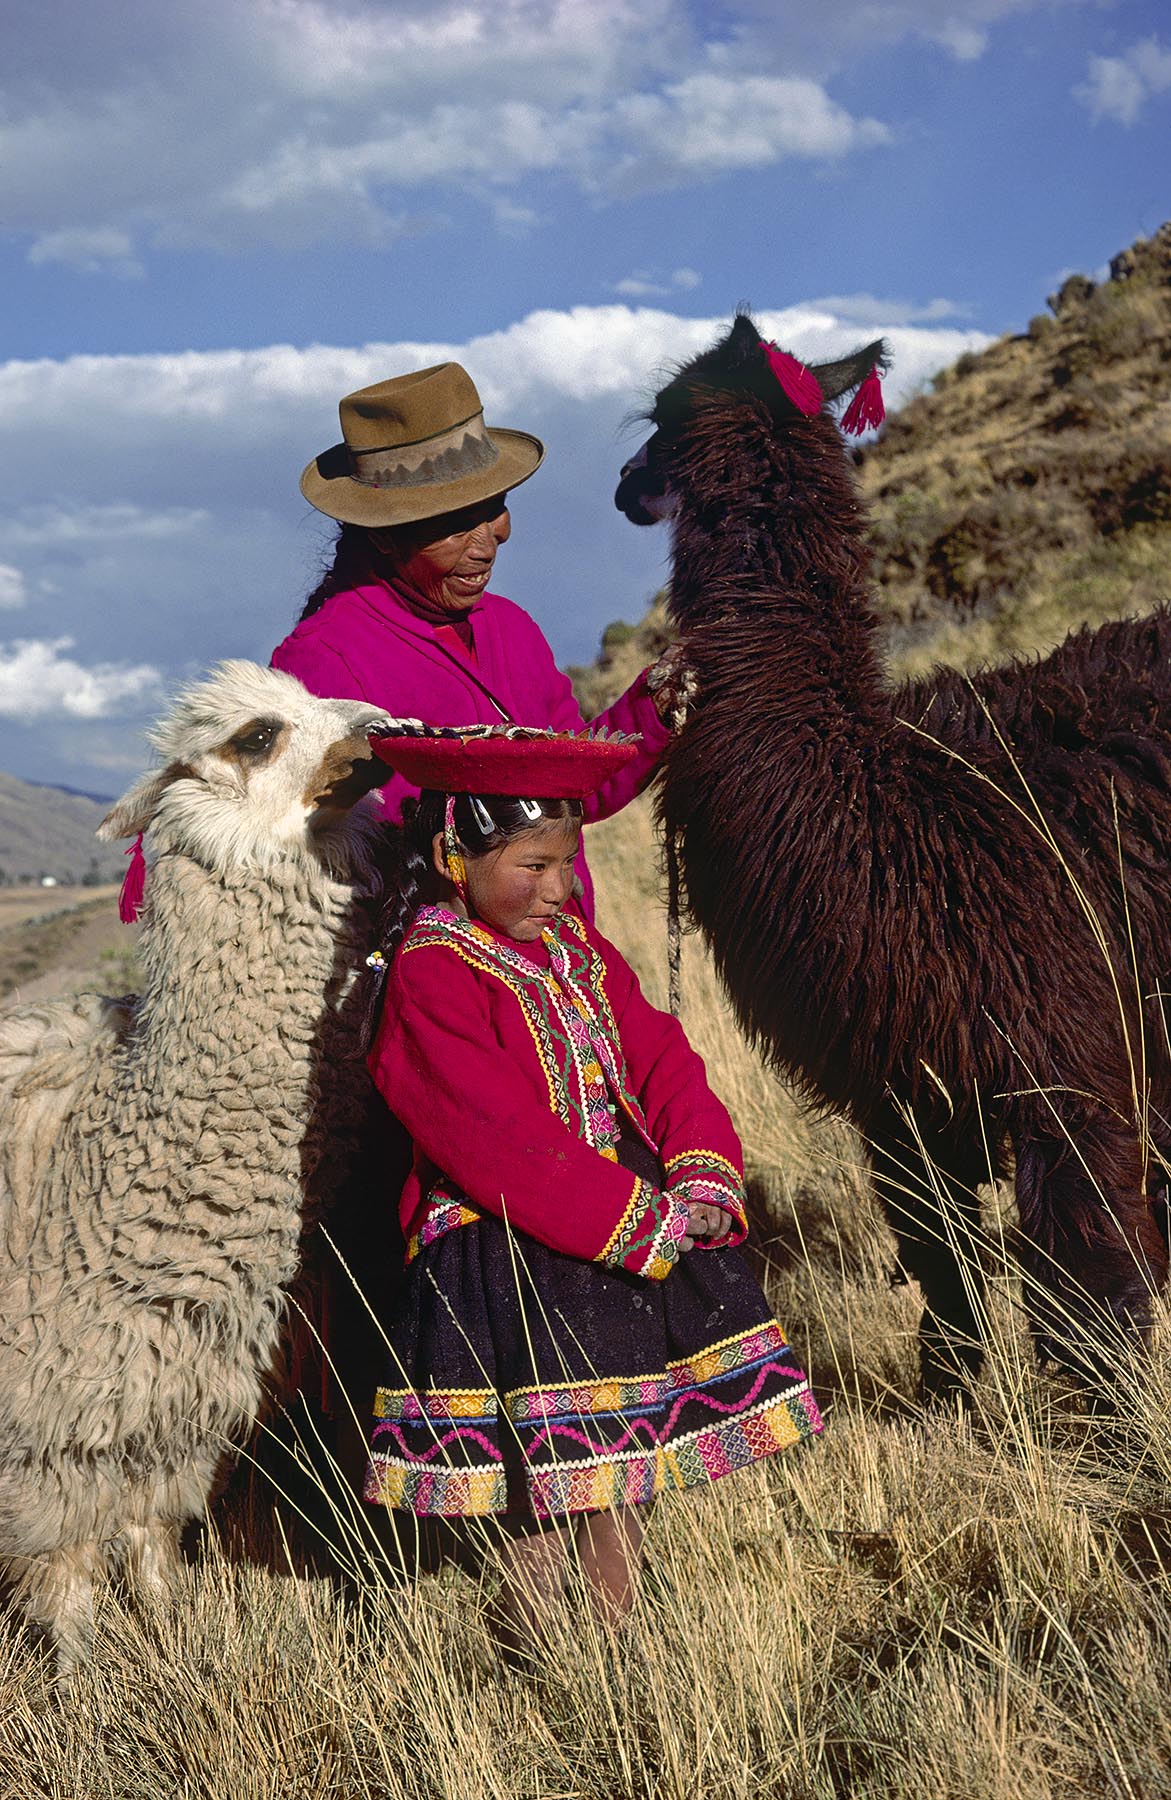 QUECHUA girl with her grandmother & LLAMAS - PERUVIAN ANDES